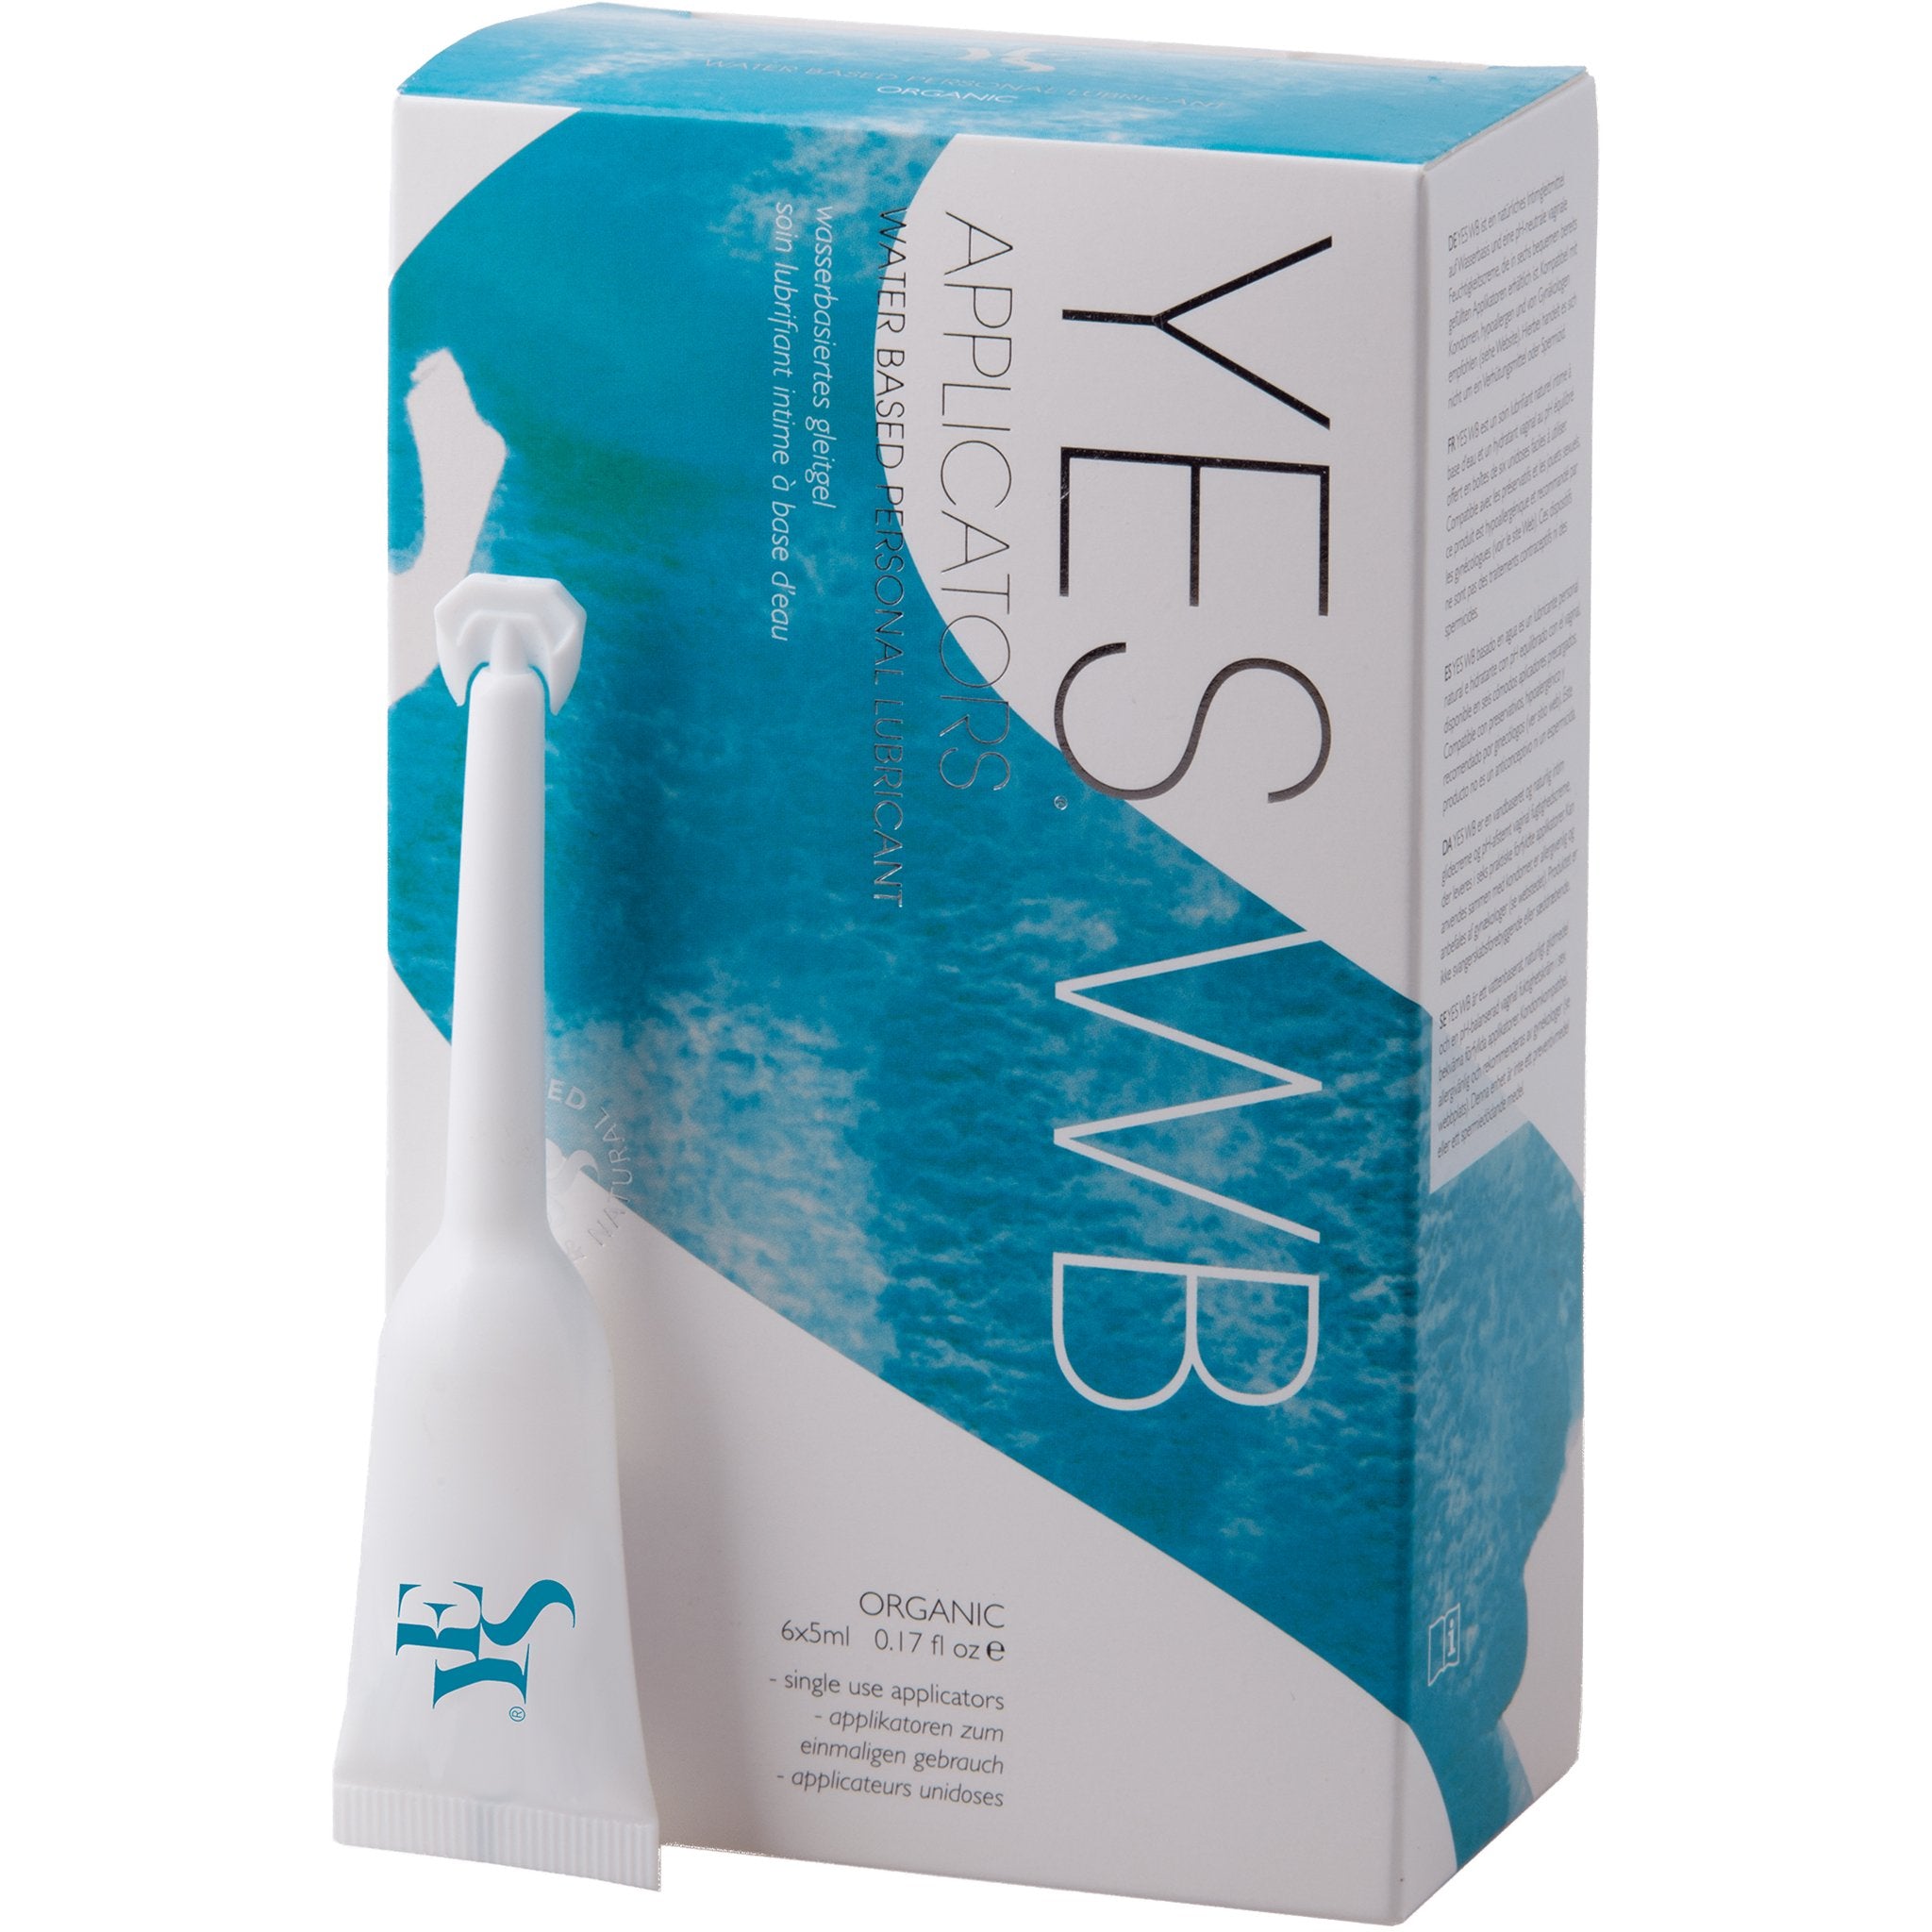 Water-Based Organic Personal Lubricant